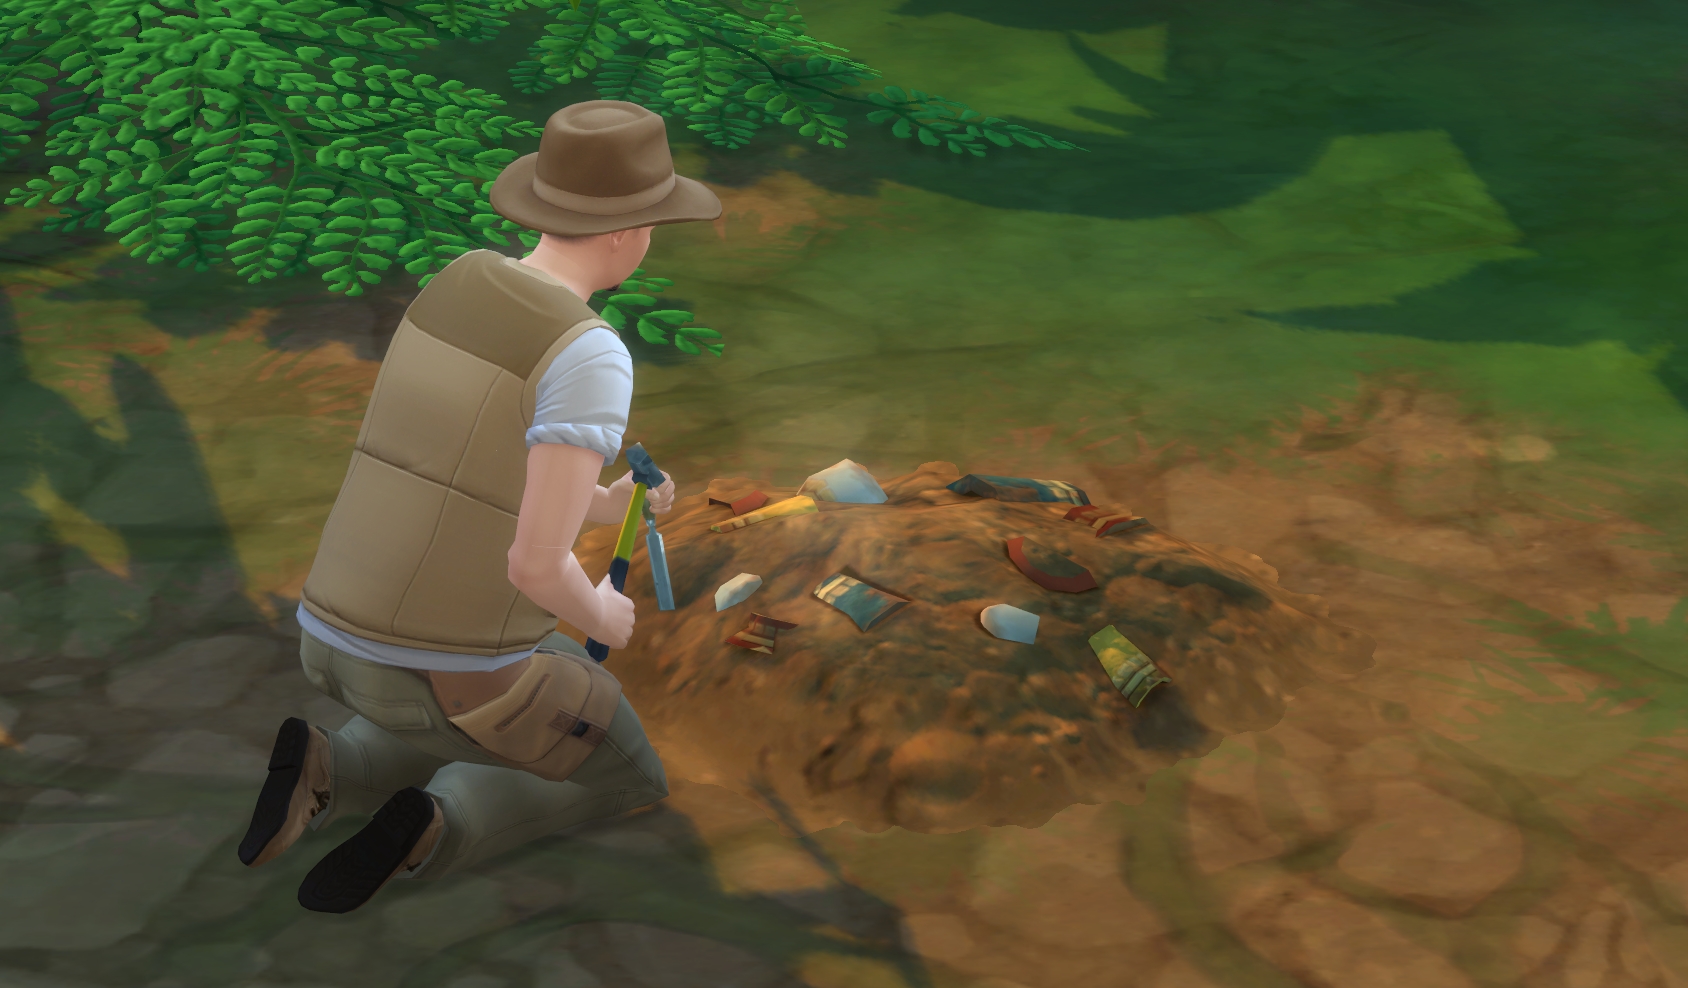 The Sims 4 Jungle Adventure: An excavation site for the Archaeology Skill